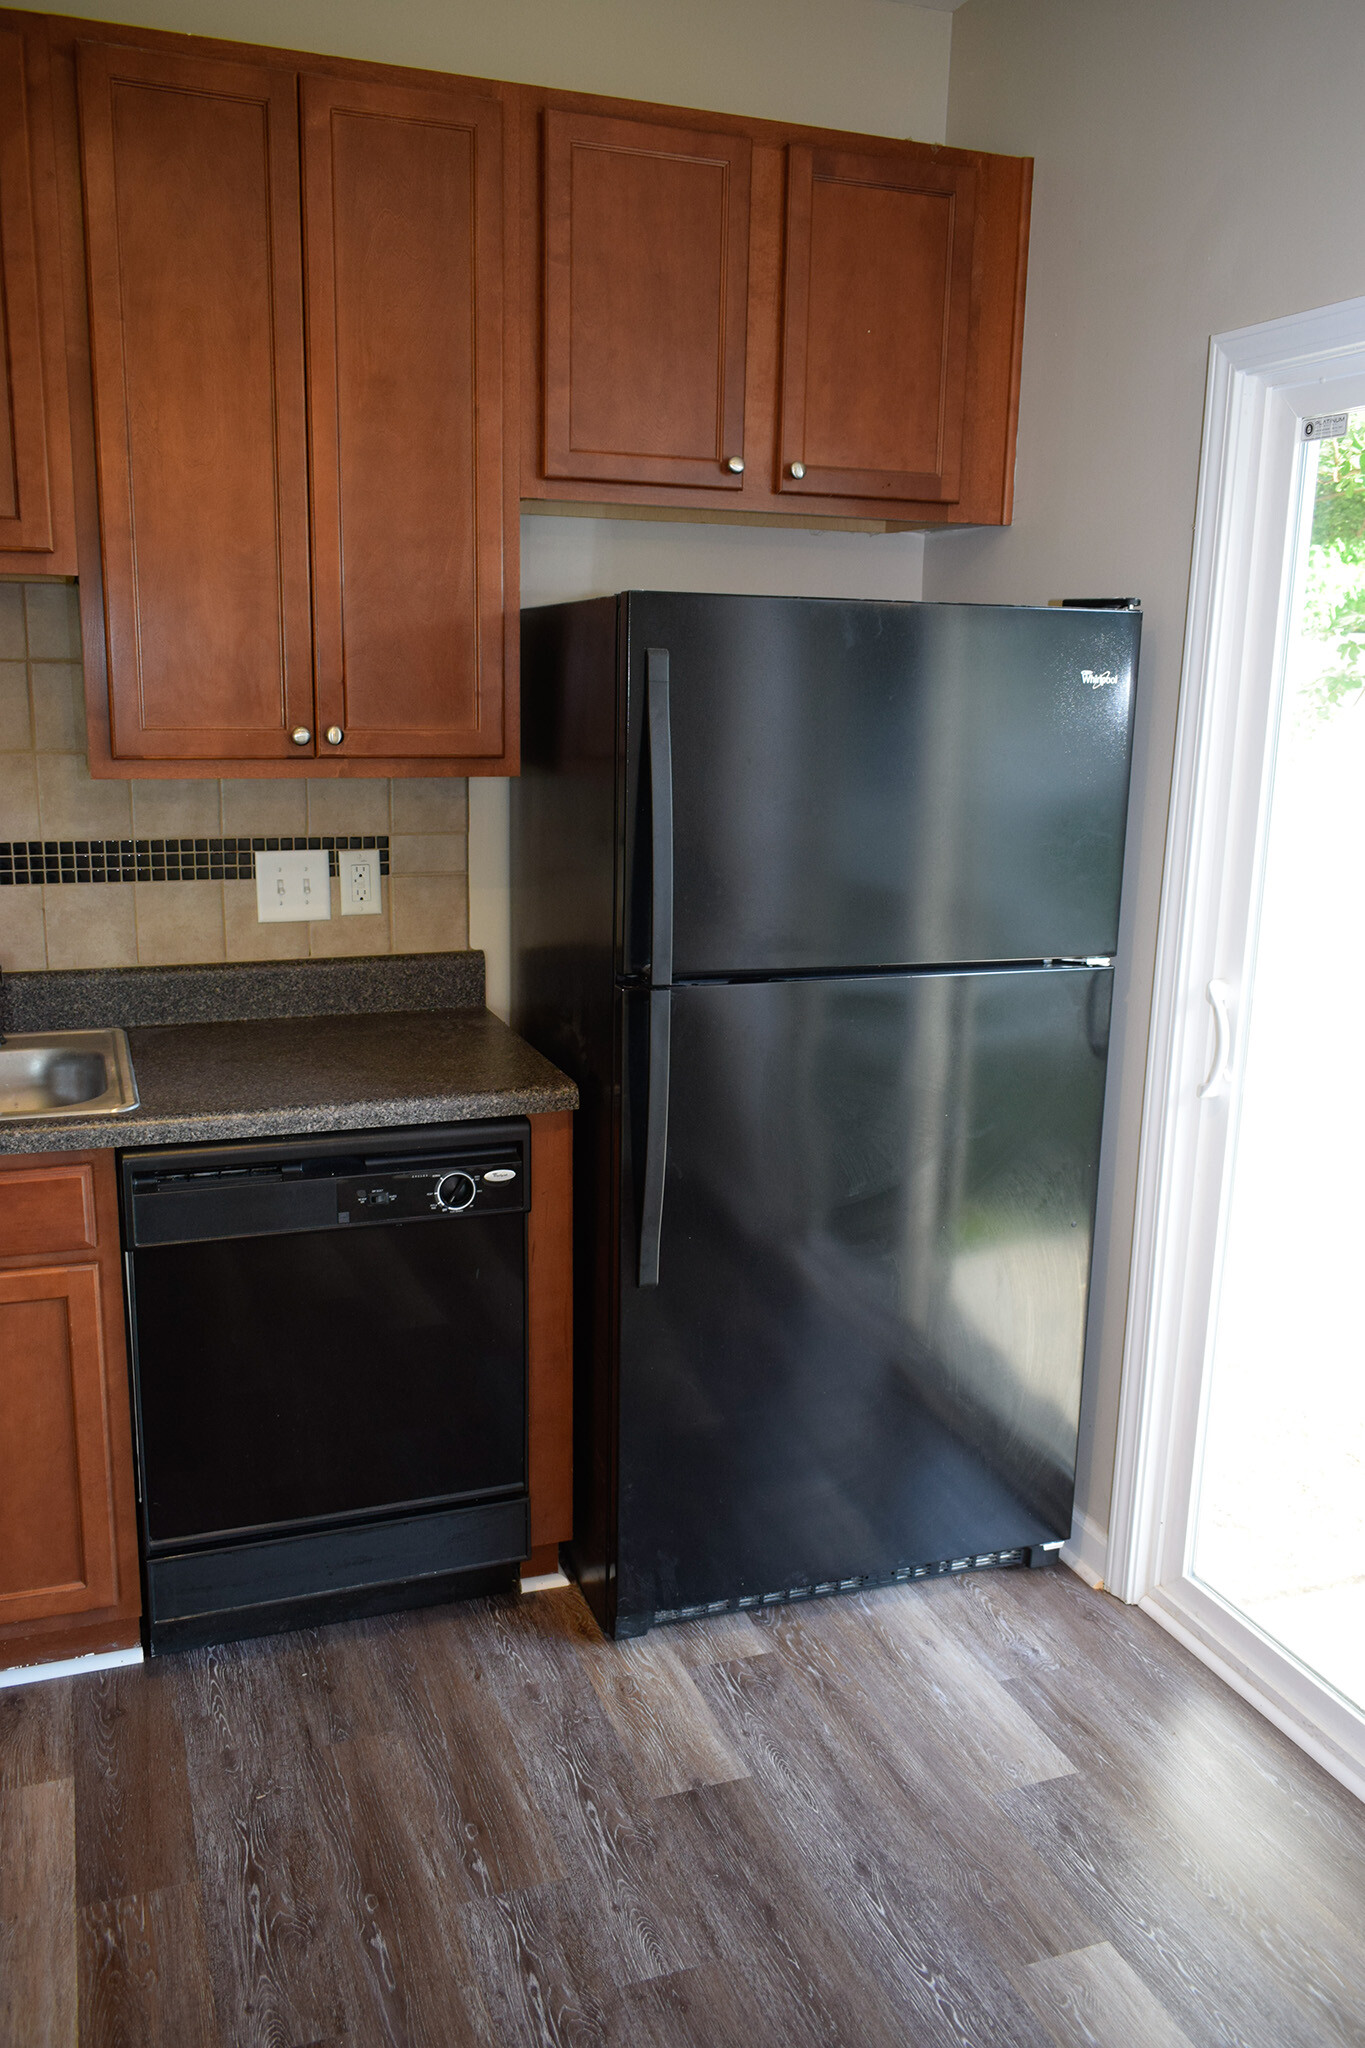 Matching black refrigerator and dishwasher convey with the property